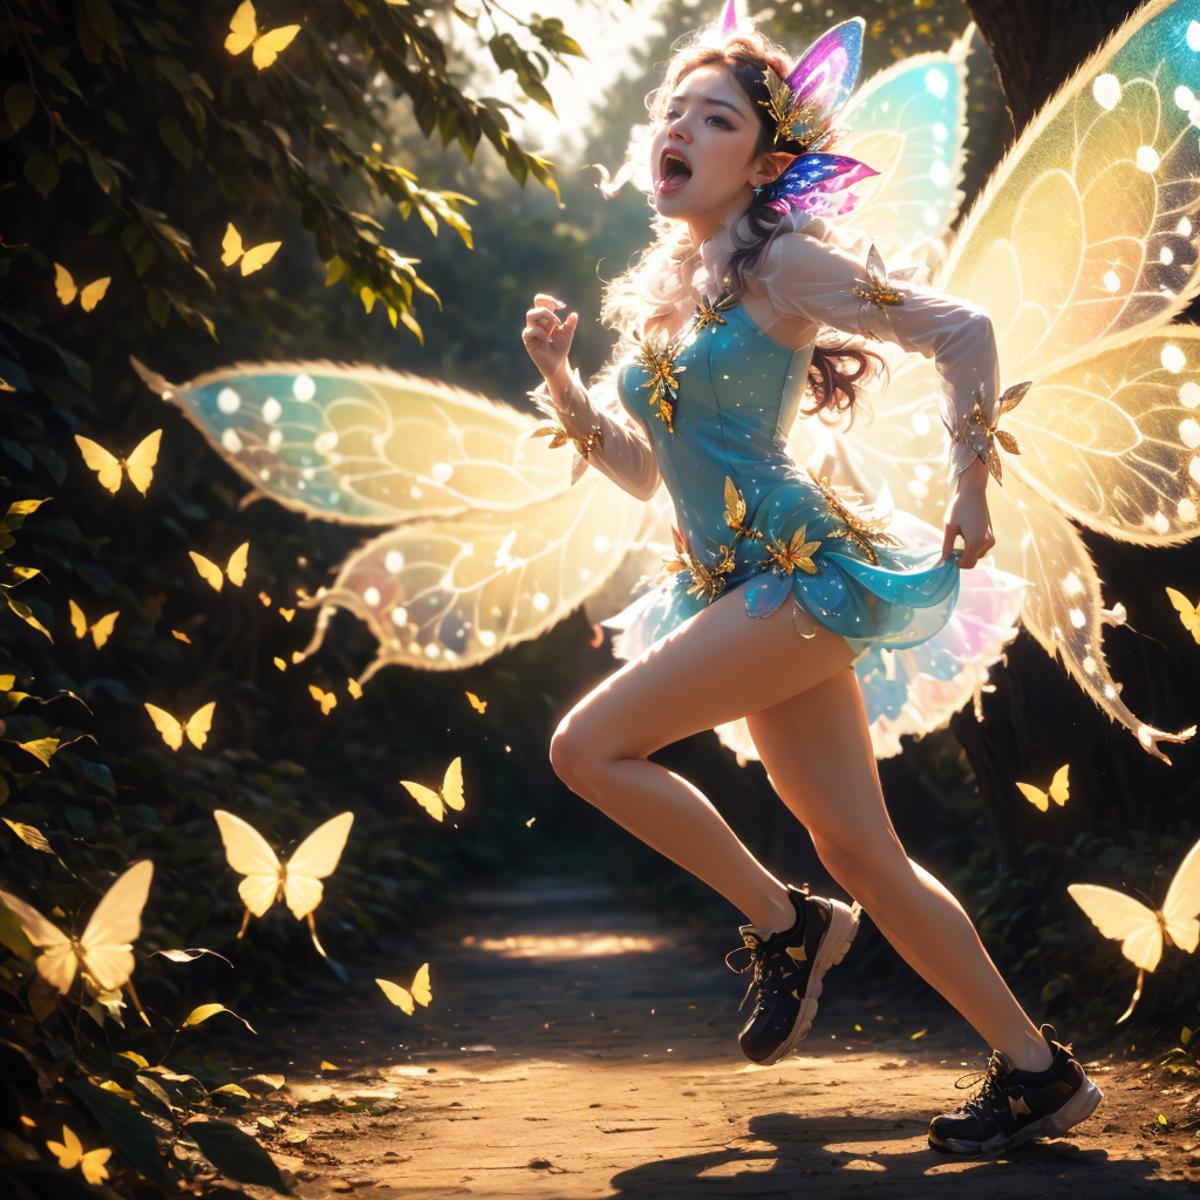 A young woman dressed as a fairy, running with butterflies flying around her.